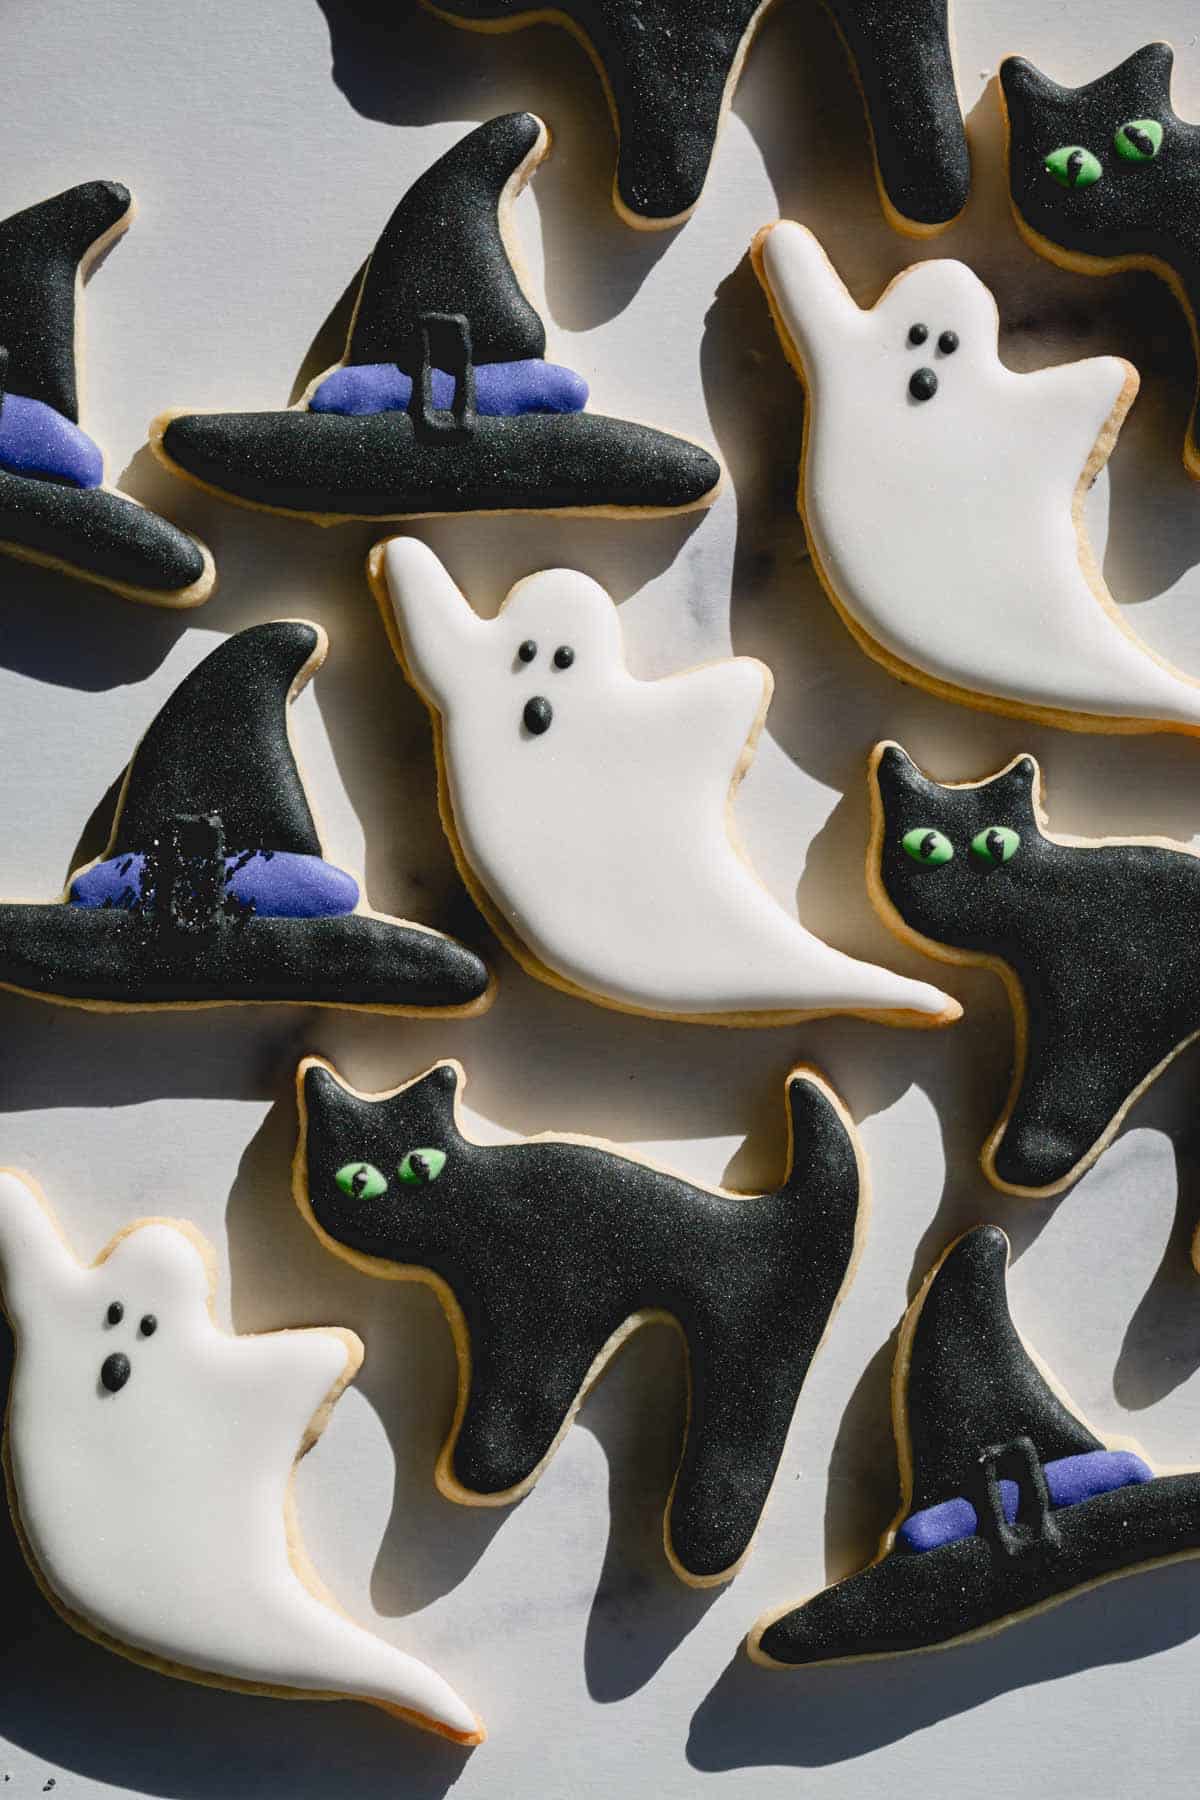 Decorated Halloween sugar cookies as witch hats, ghosts, and black cats.